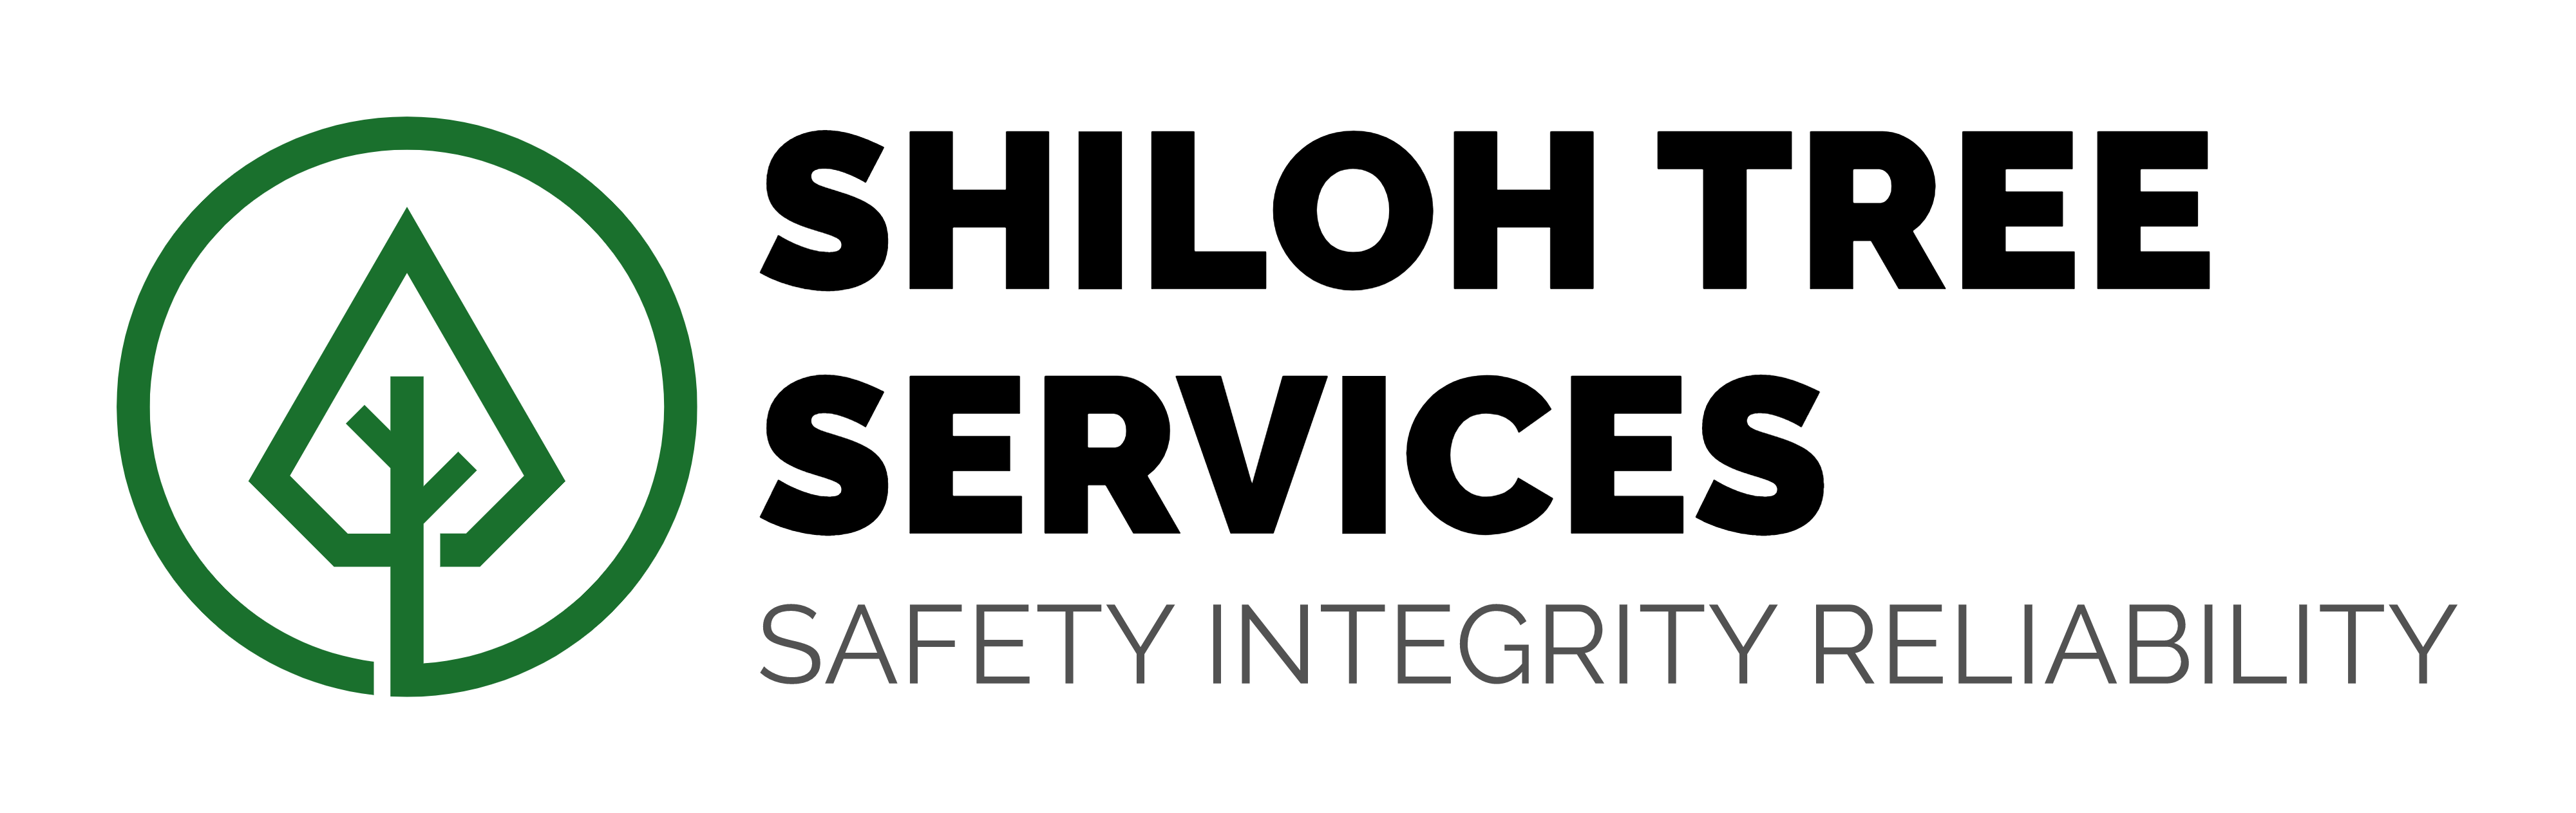 Shiloh-Tree-Services-logo.png